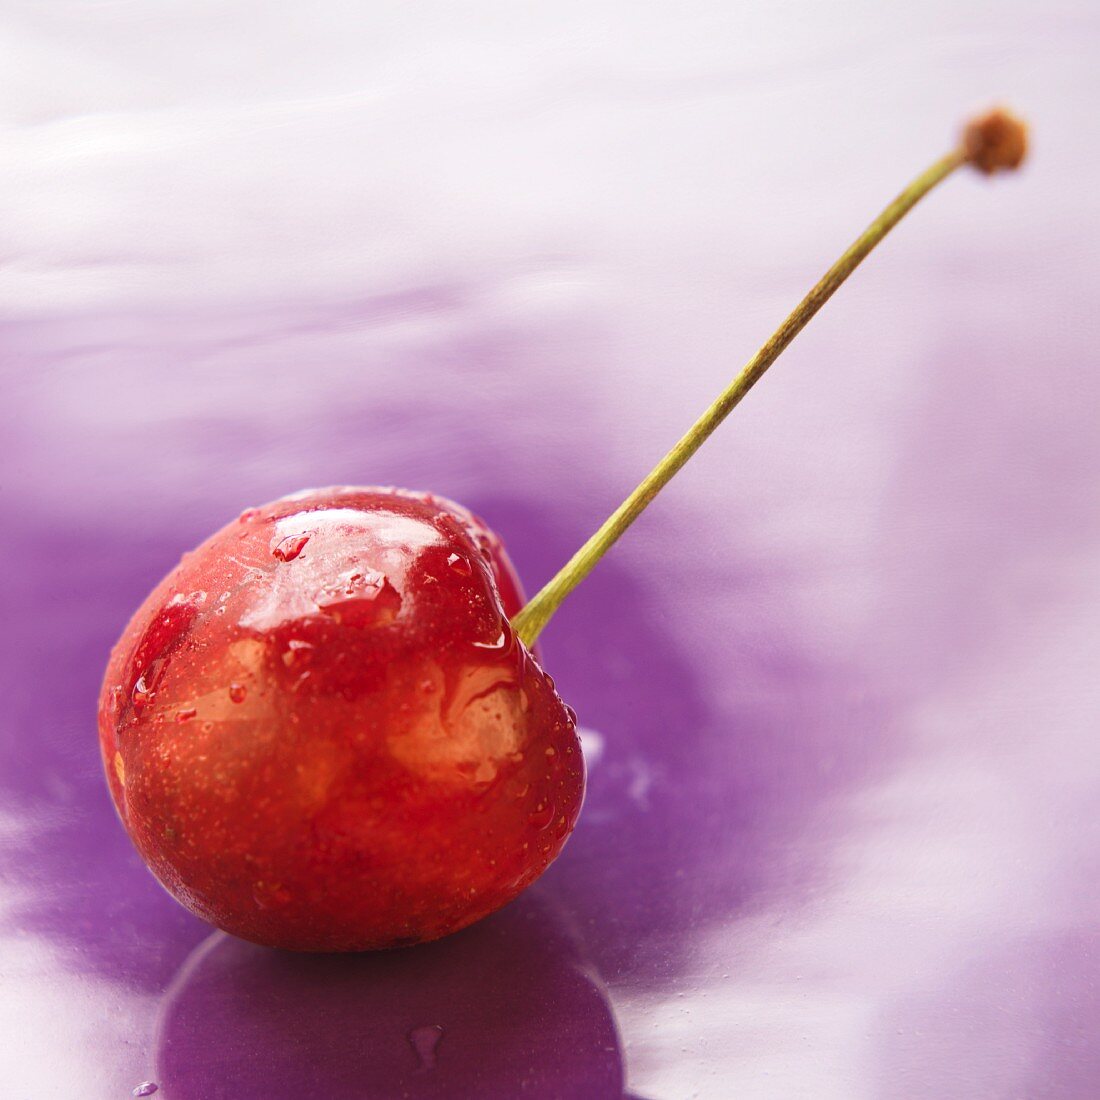 A cherry on a purple surface